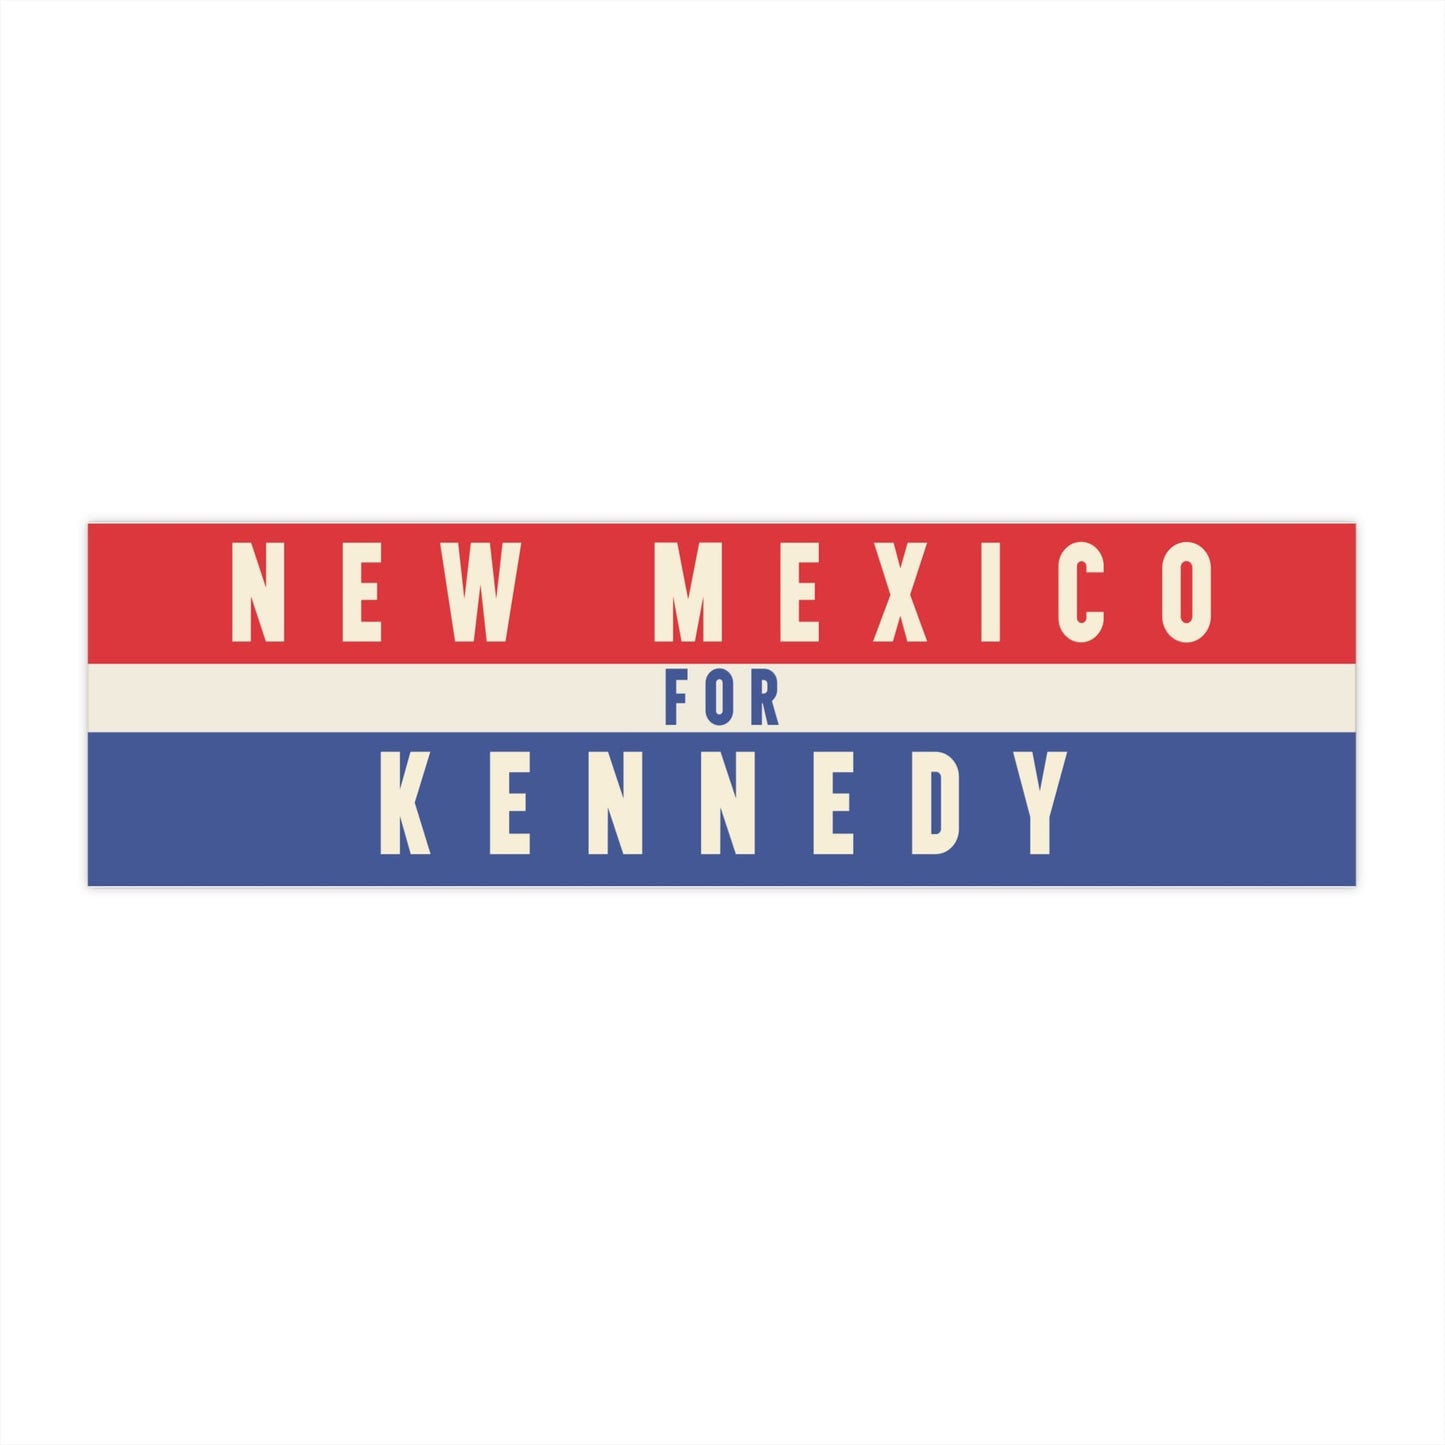 New Mexico for Kennedy Bumper Sticker - TEAM KENNEDY. All rights reserved